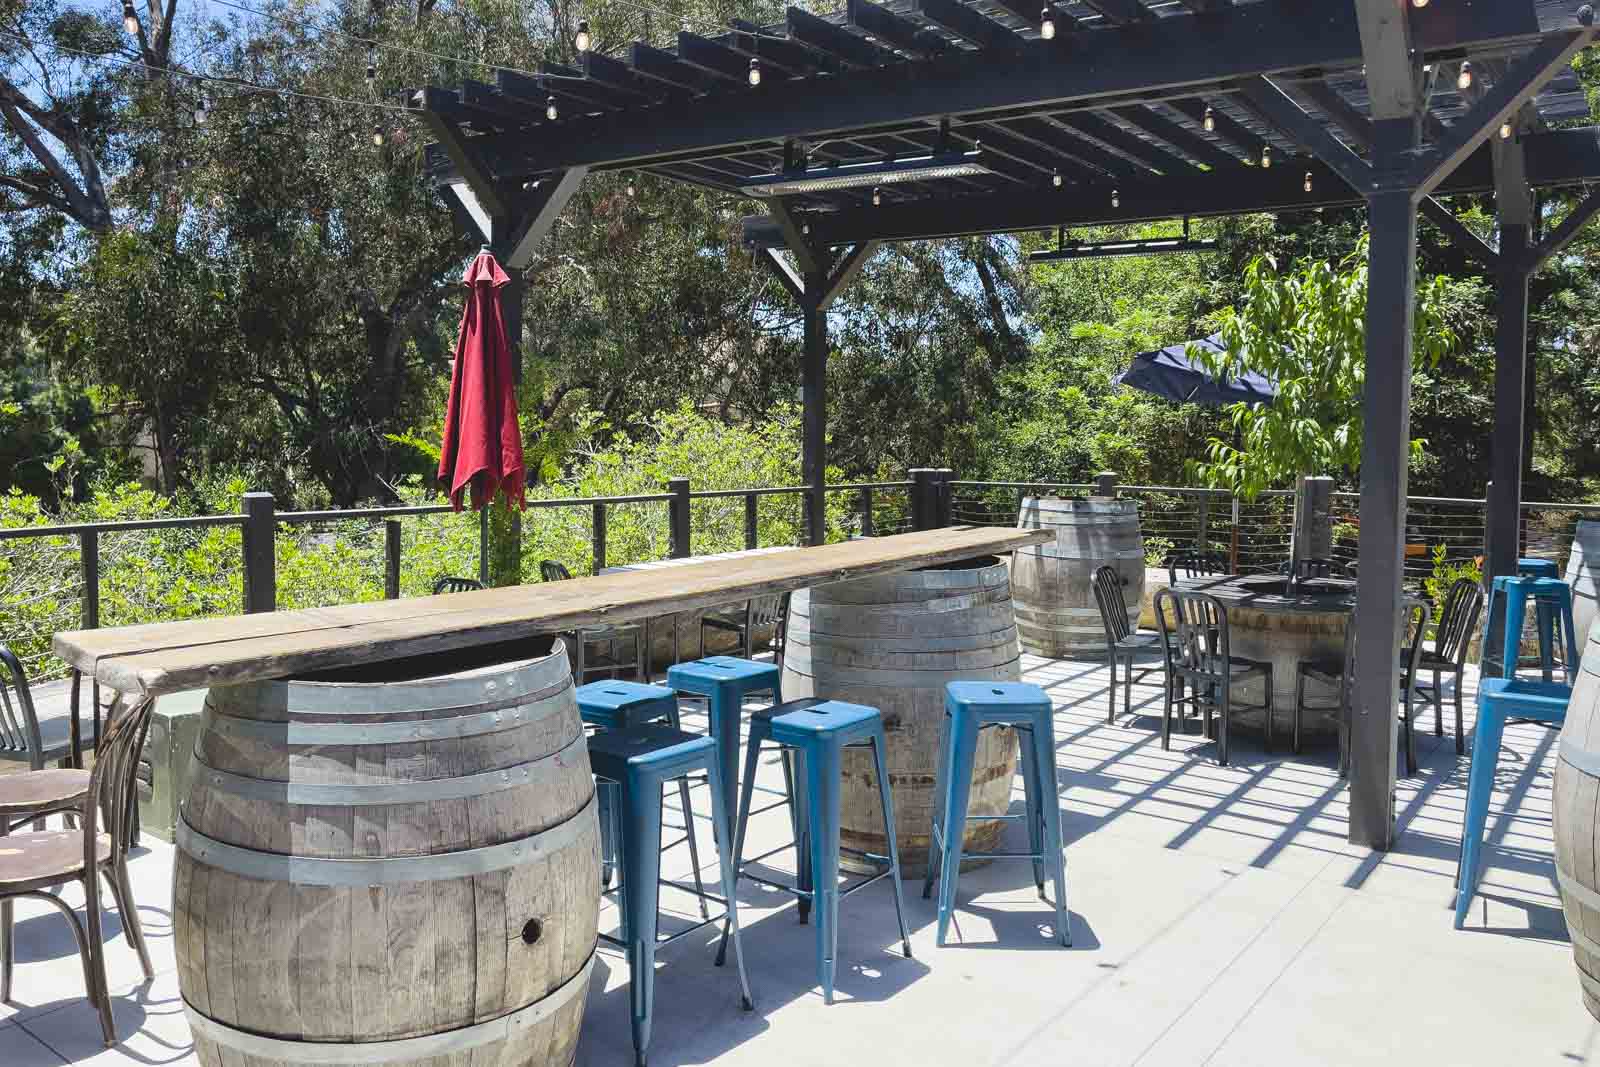 The beer garden at Bang the Drum Brewery in the sun in San Luis Obispo.